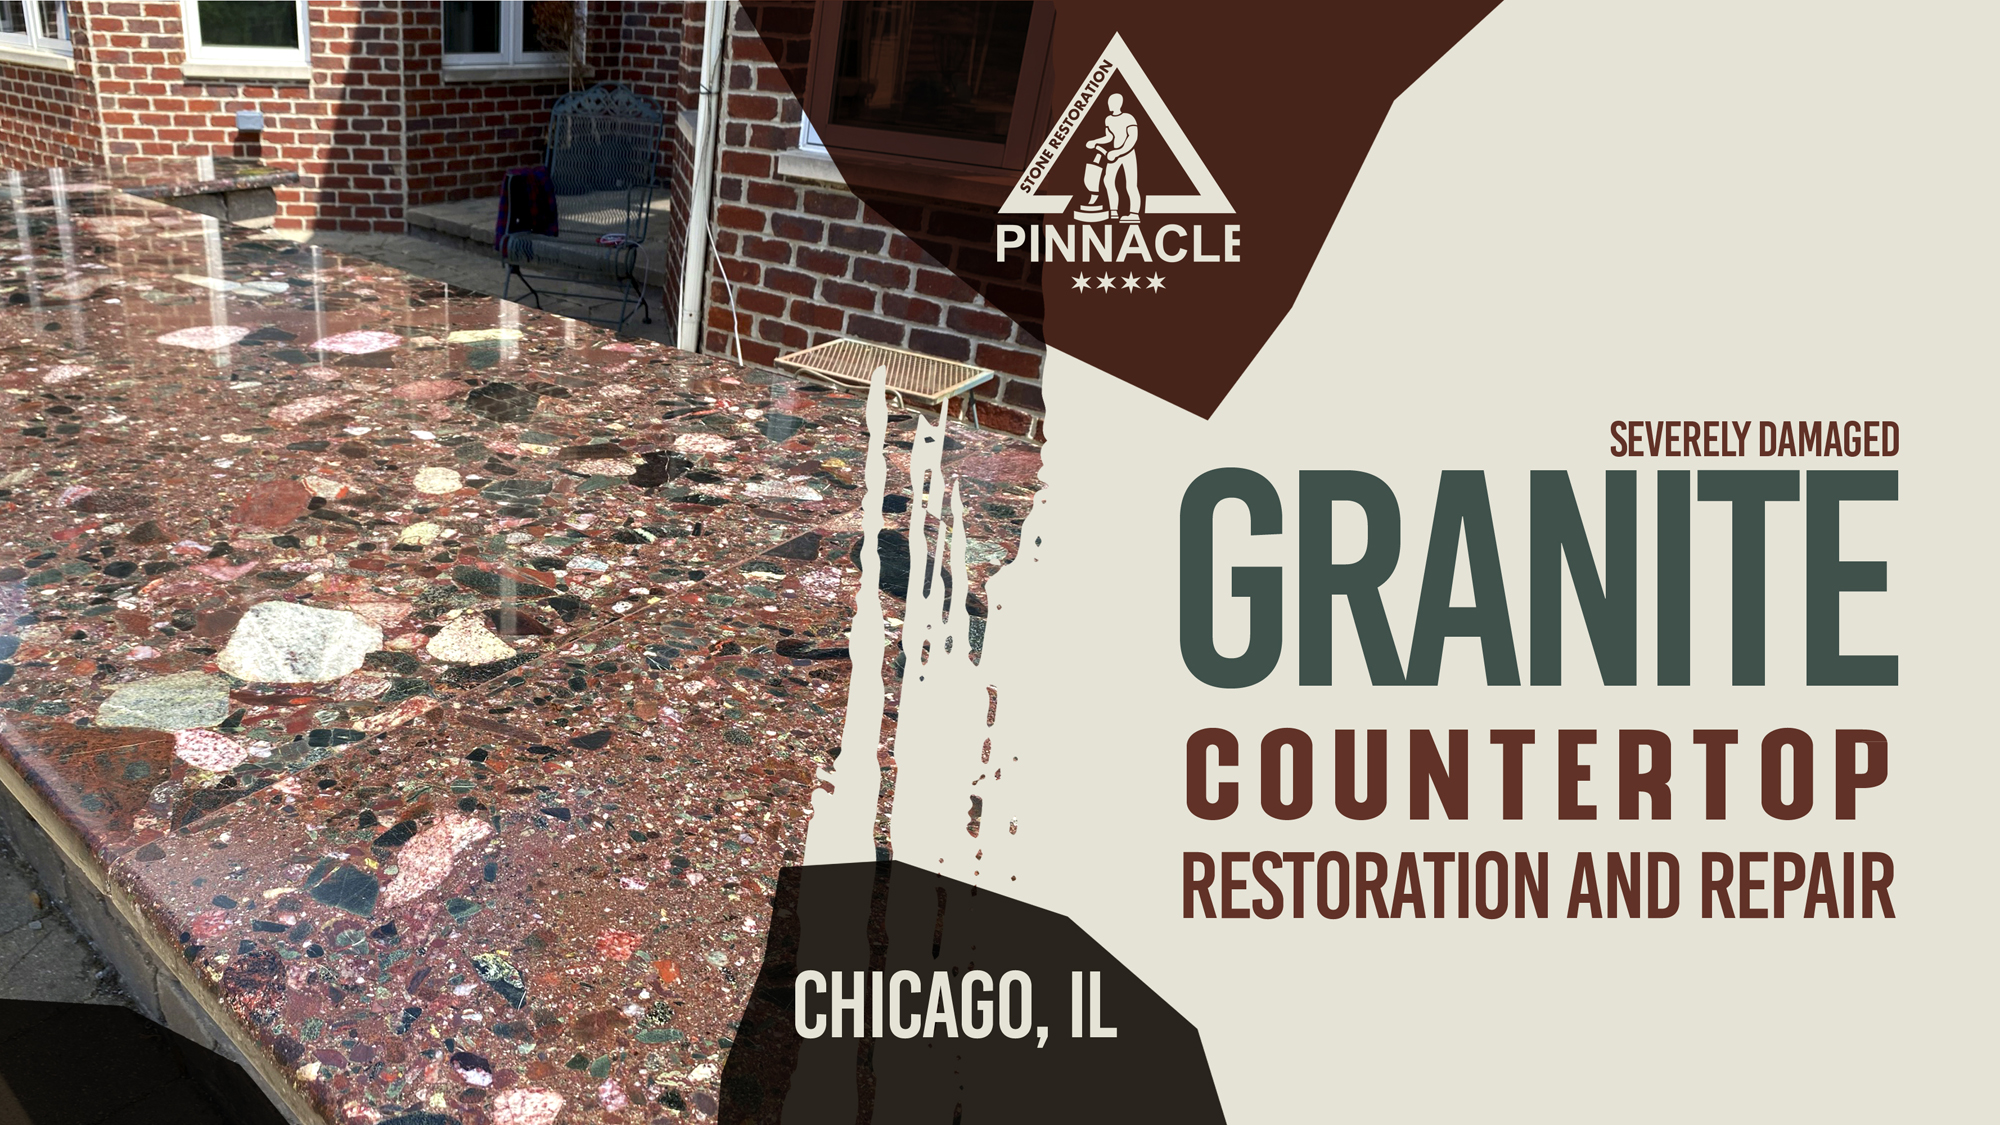 Severely damaged outdoor granite countertop restoration, crack and chip repair, seam leveling, broken slab fix, deep clean, buff, and seal.